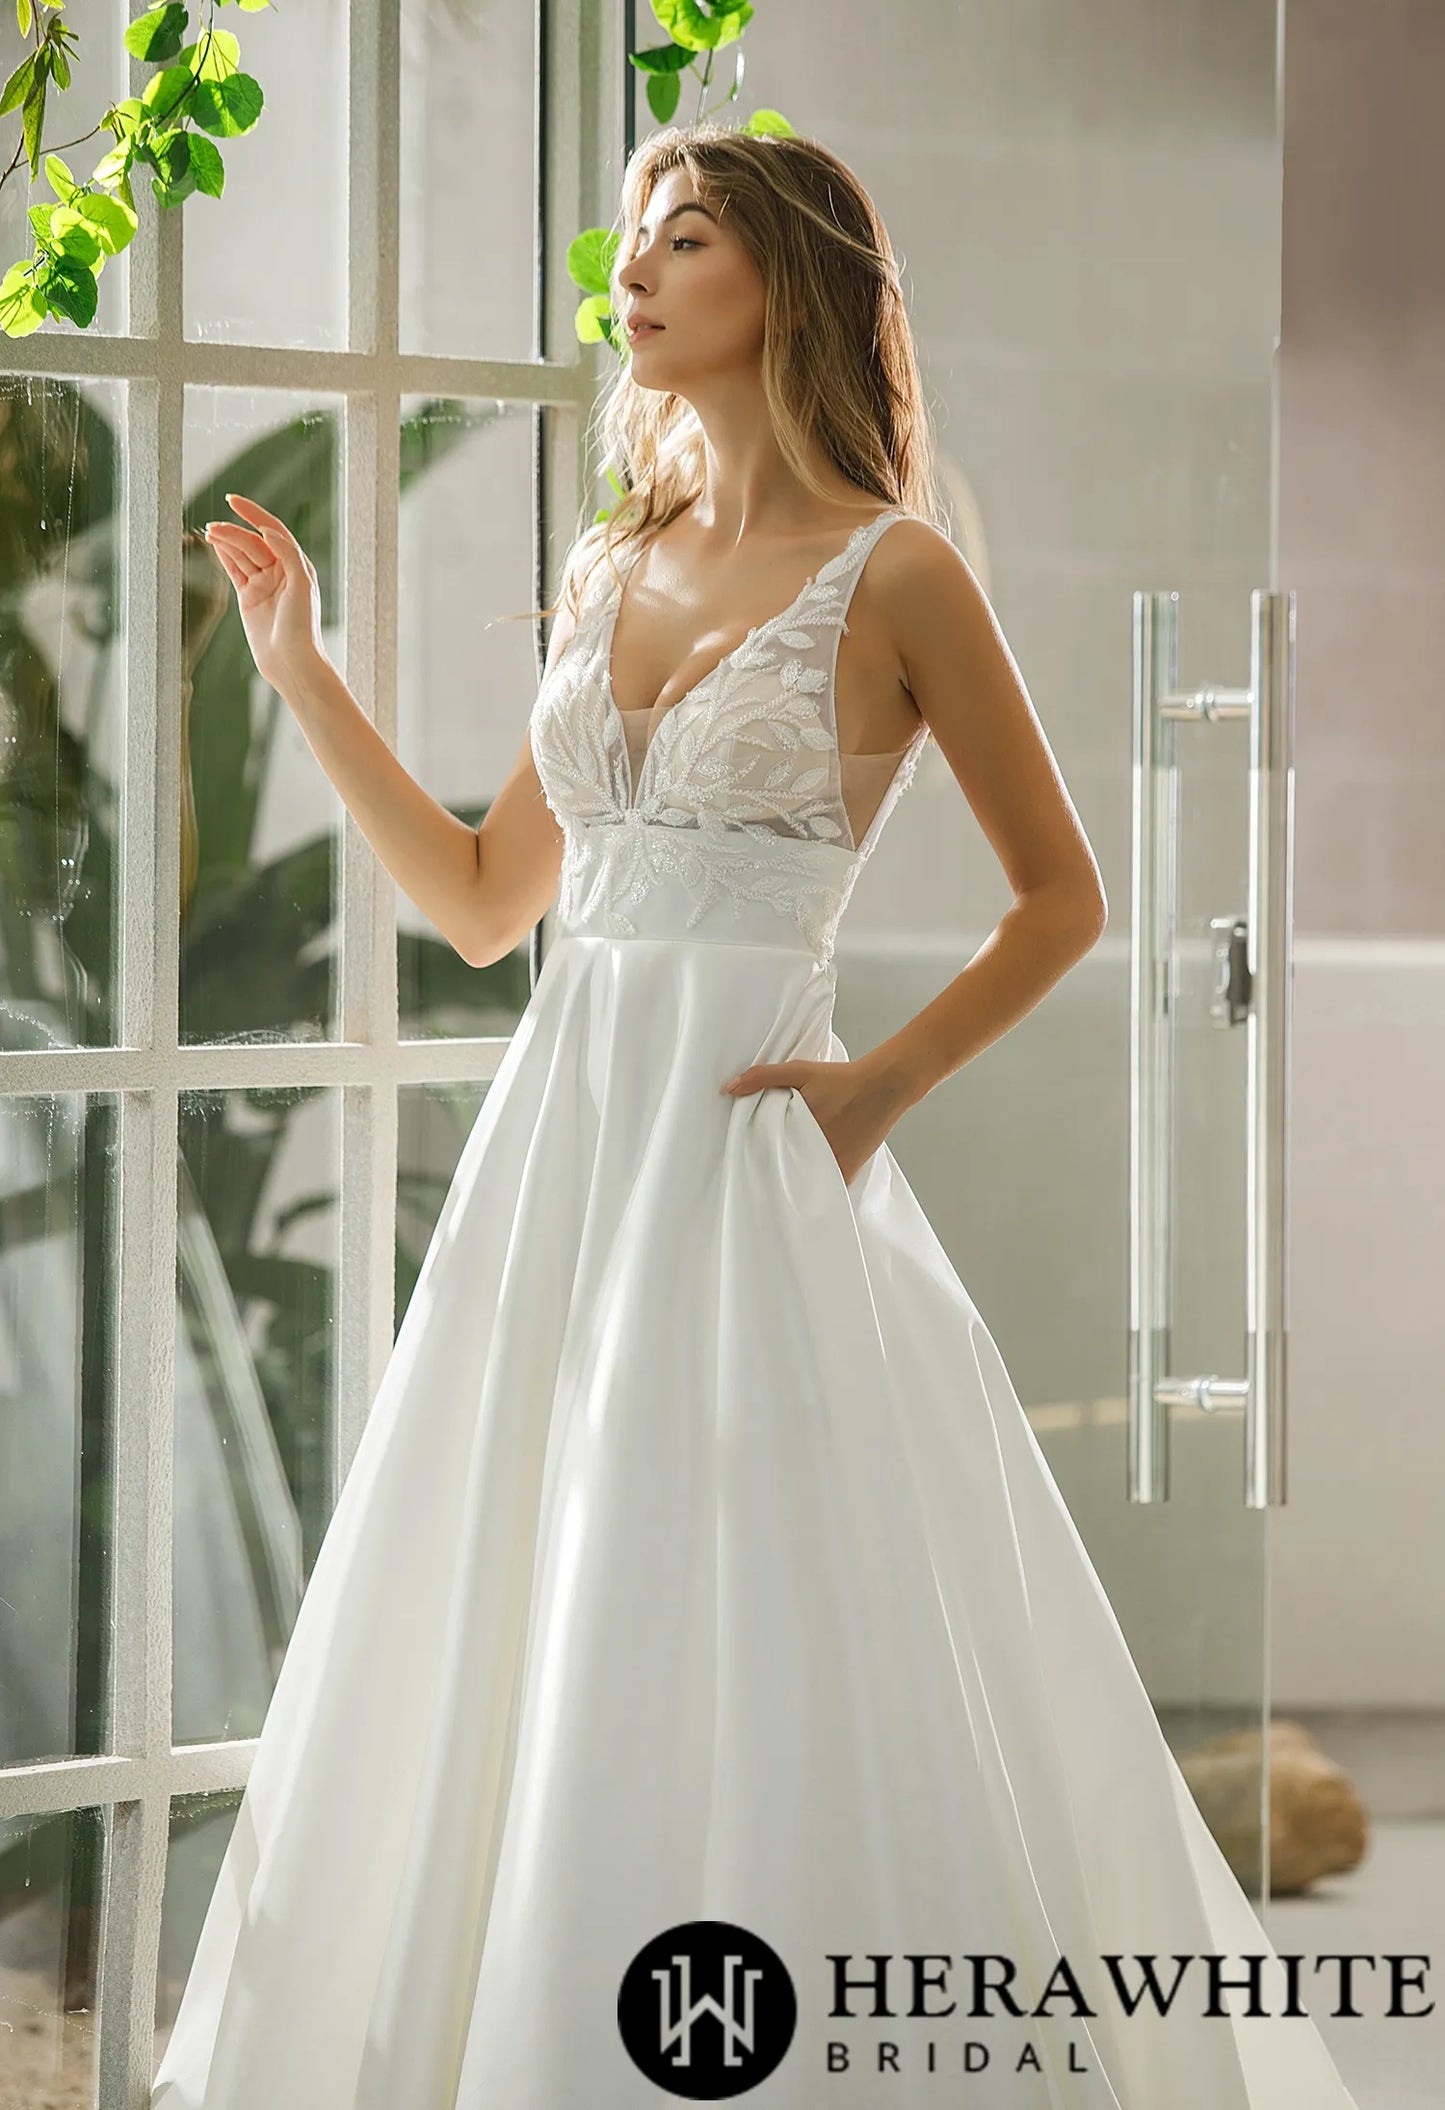 Illusion Bodice Satin A-line Bridal Gown With Pockets